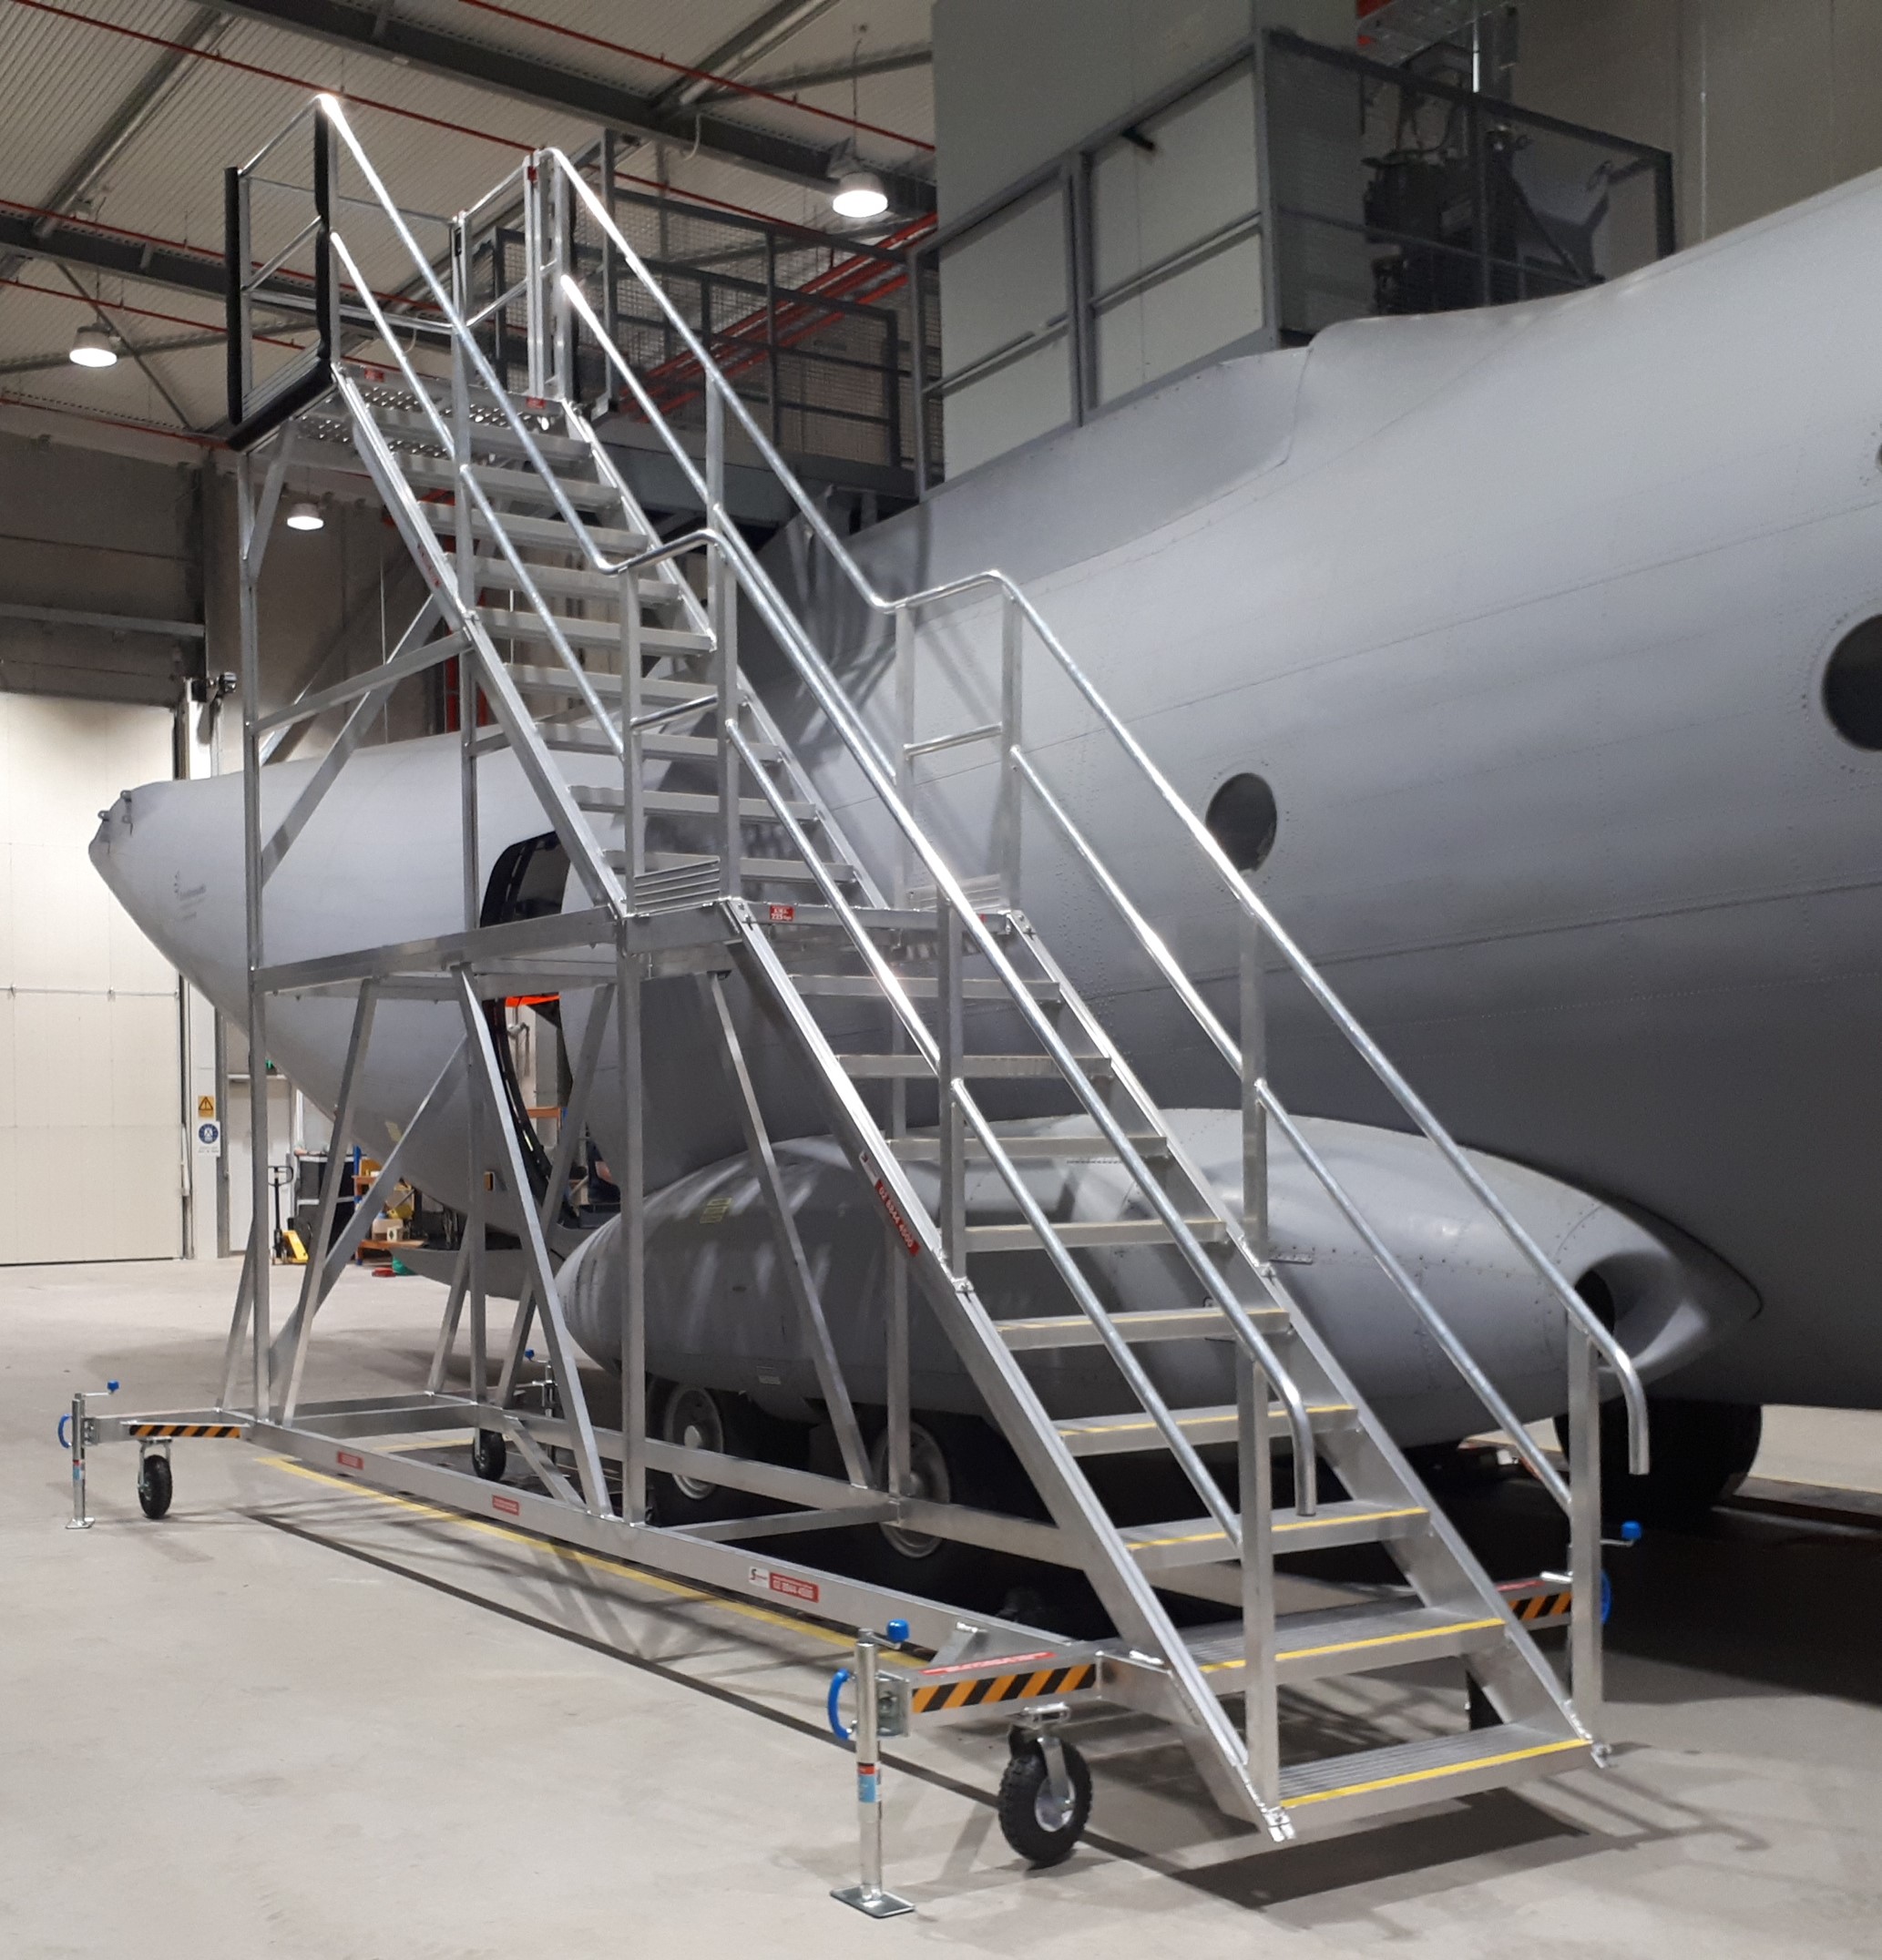 'Mission complete' with a safe & efficient solution to access the top of Aircraft Fuselage